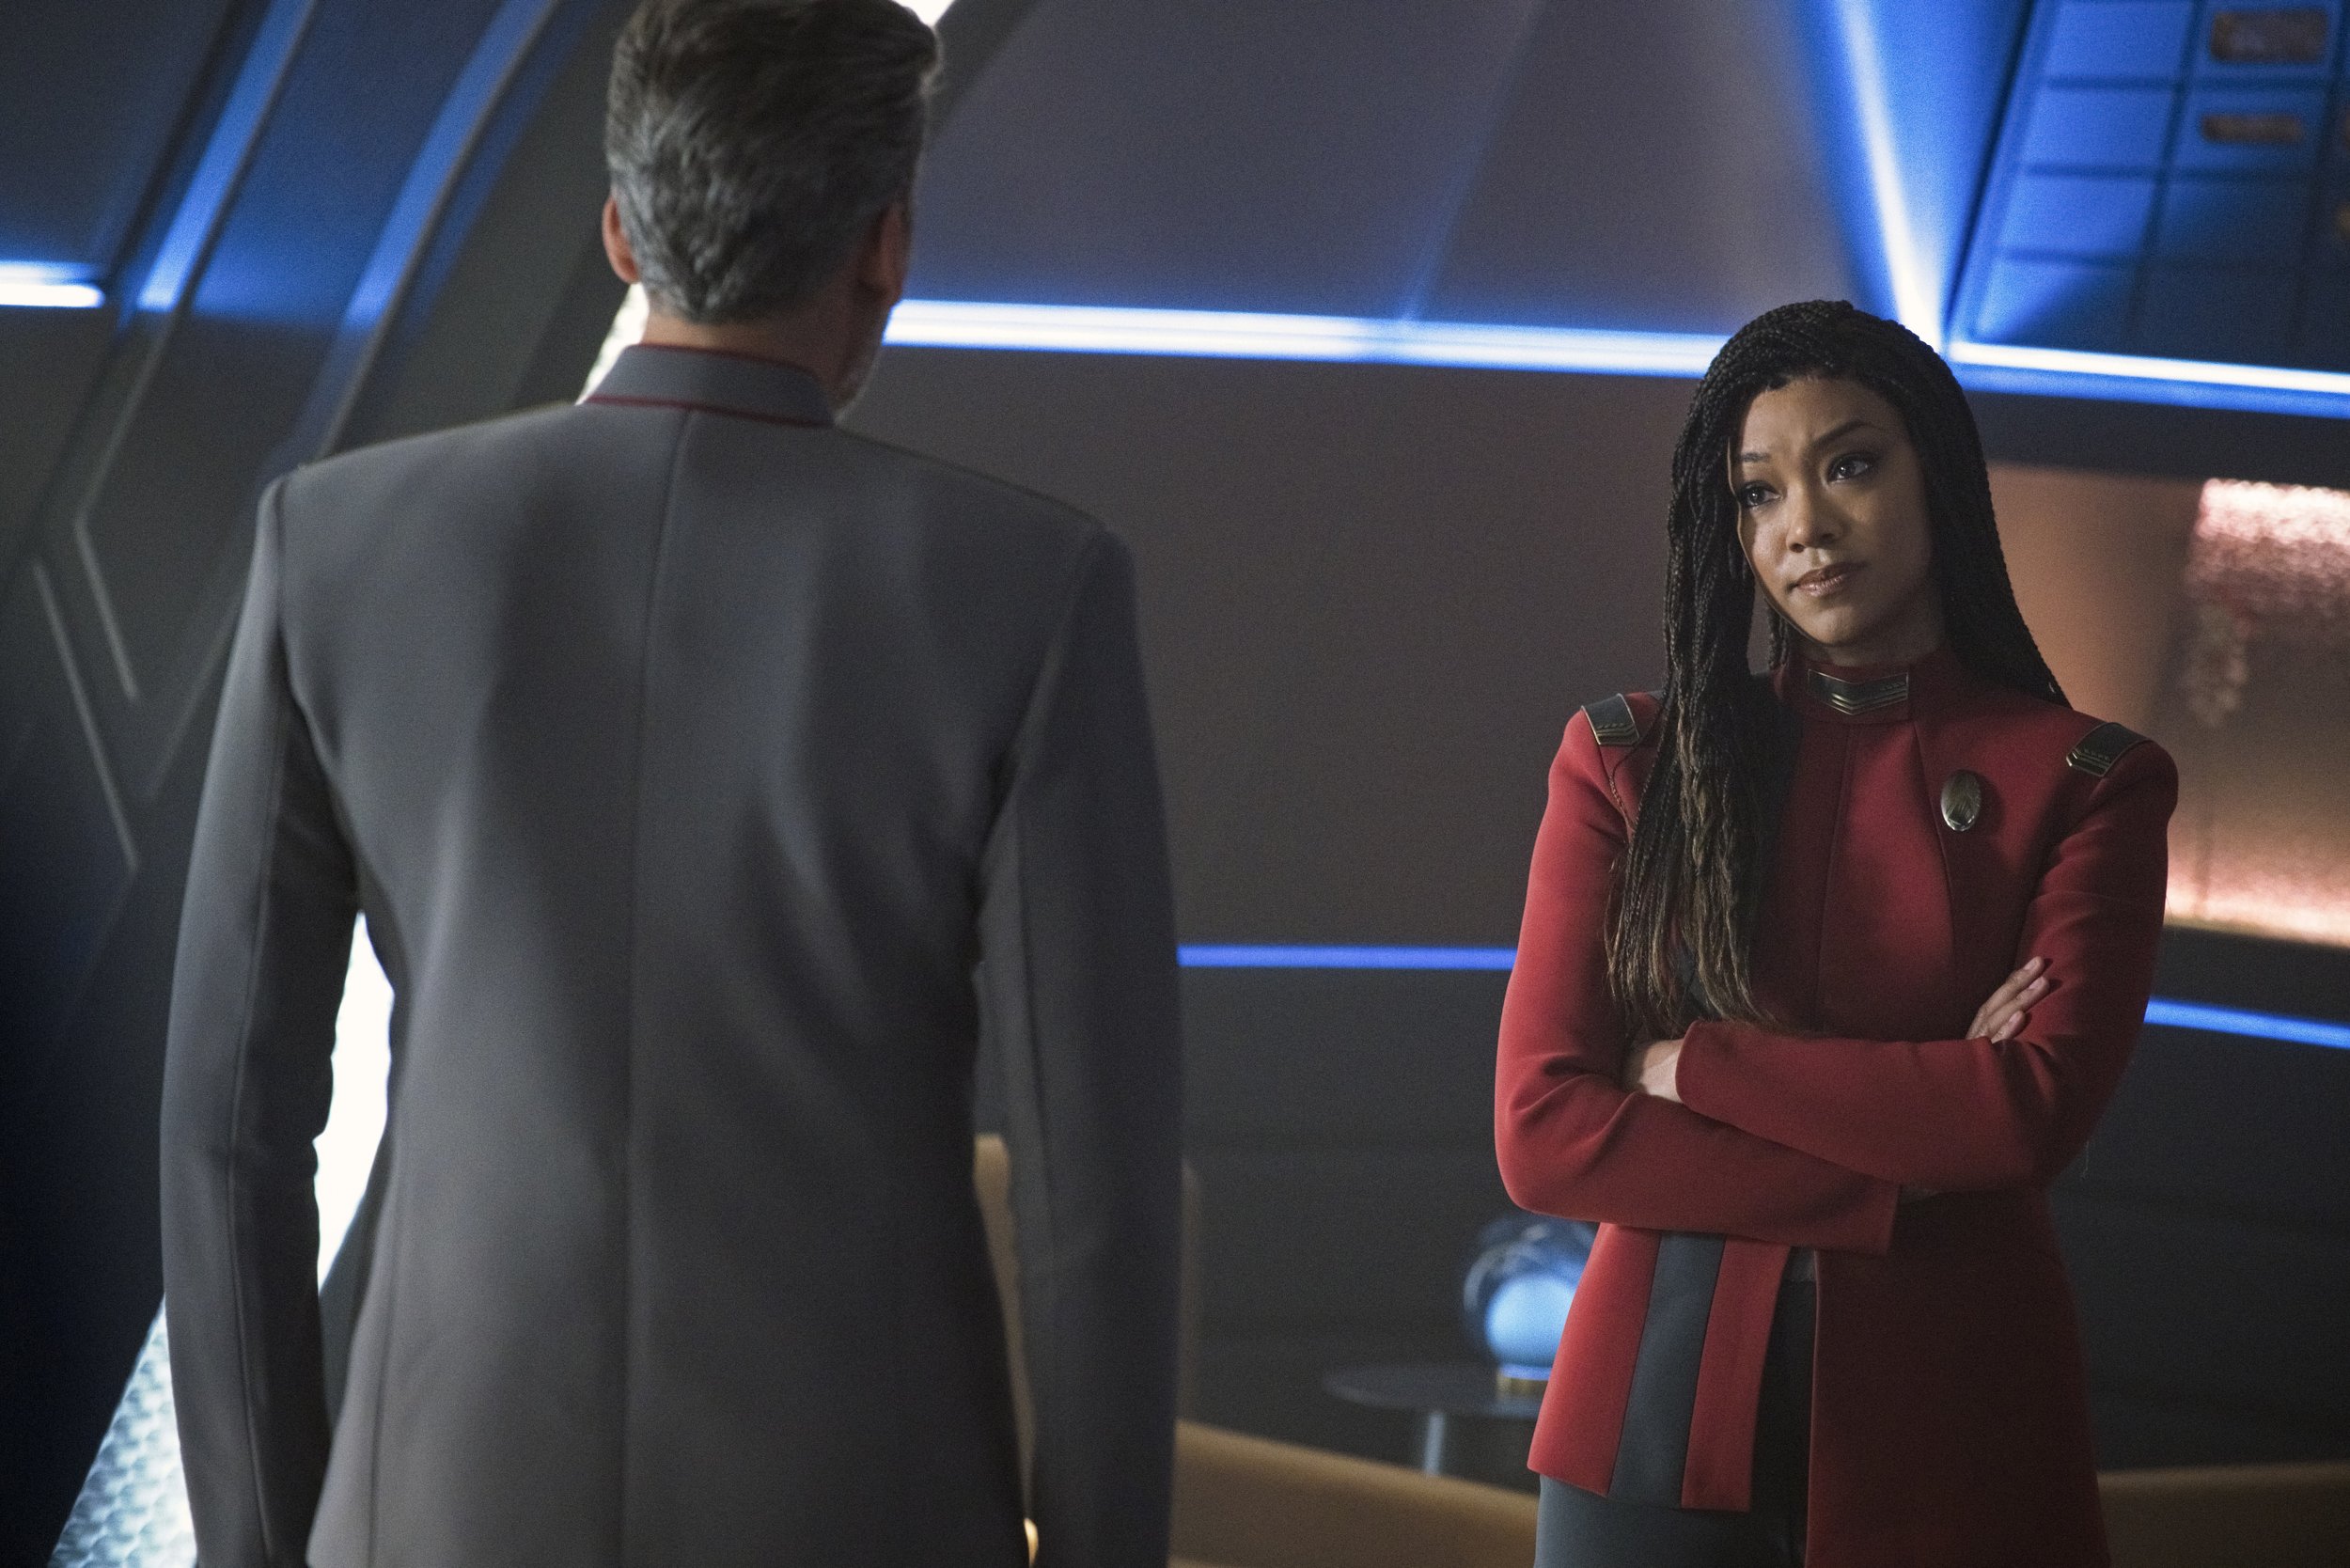   Pictured: Oded Fehr as Admiral Vance and Sonequa Martin-Green as Burnham of the Paramount+ original series STAR TREK: DISCOVERY. Photo Cr: Michael Gibson/Paramount+ (C) 2021 CBS Interactive. All Rights Reserved.  